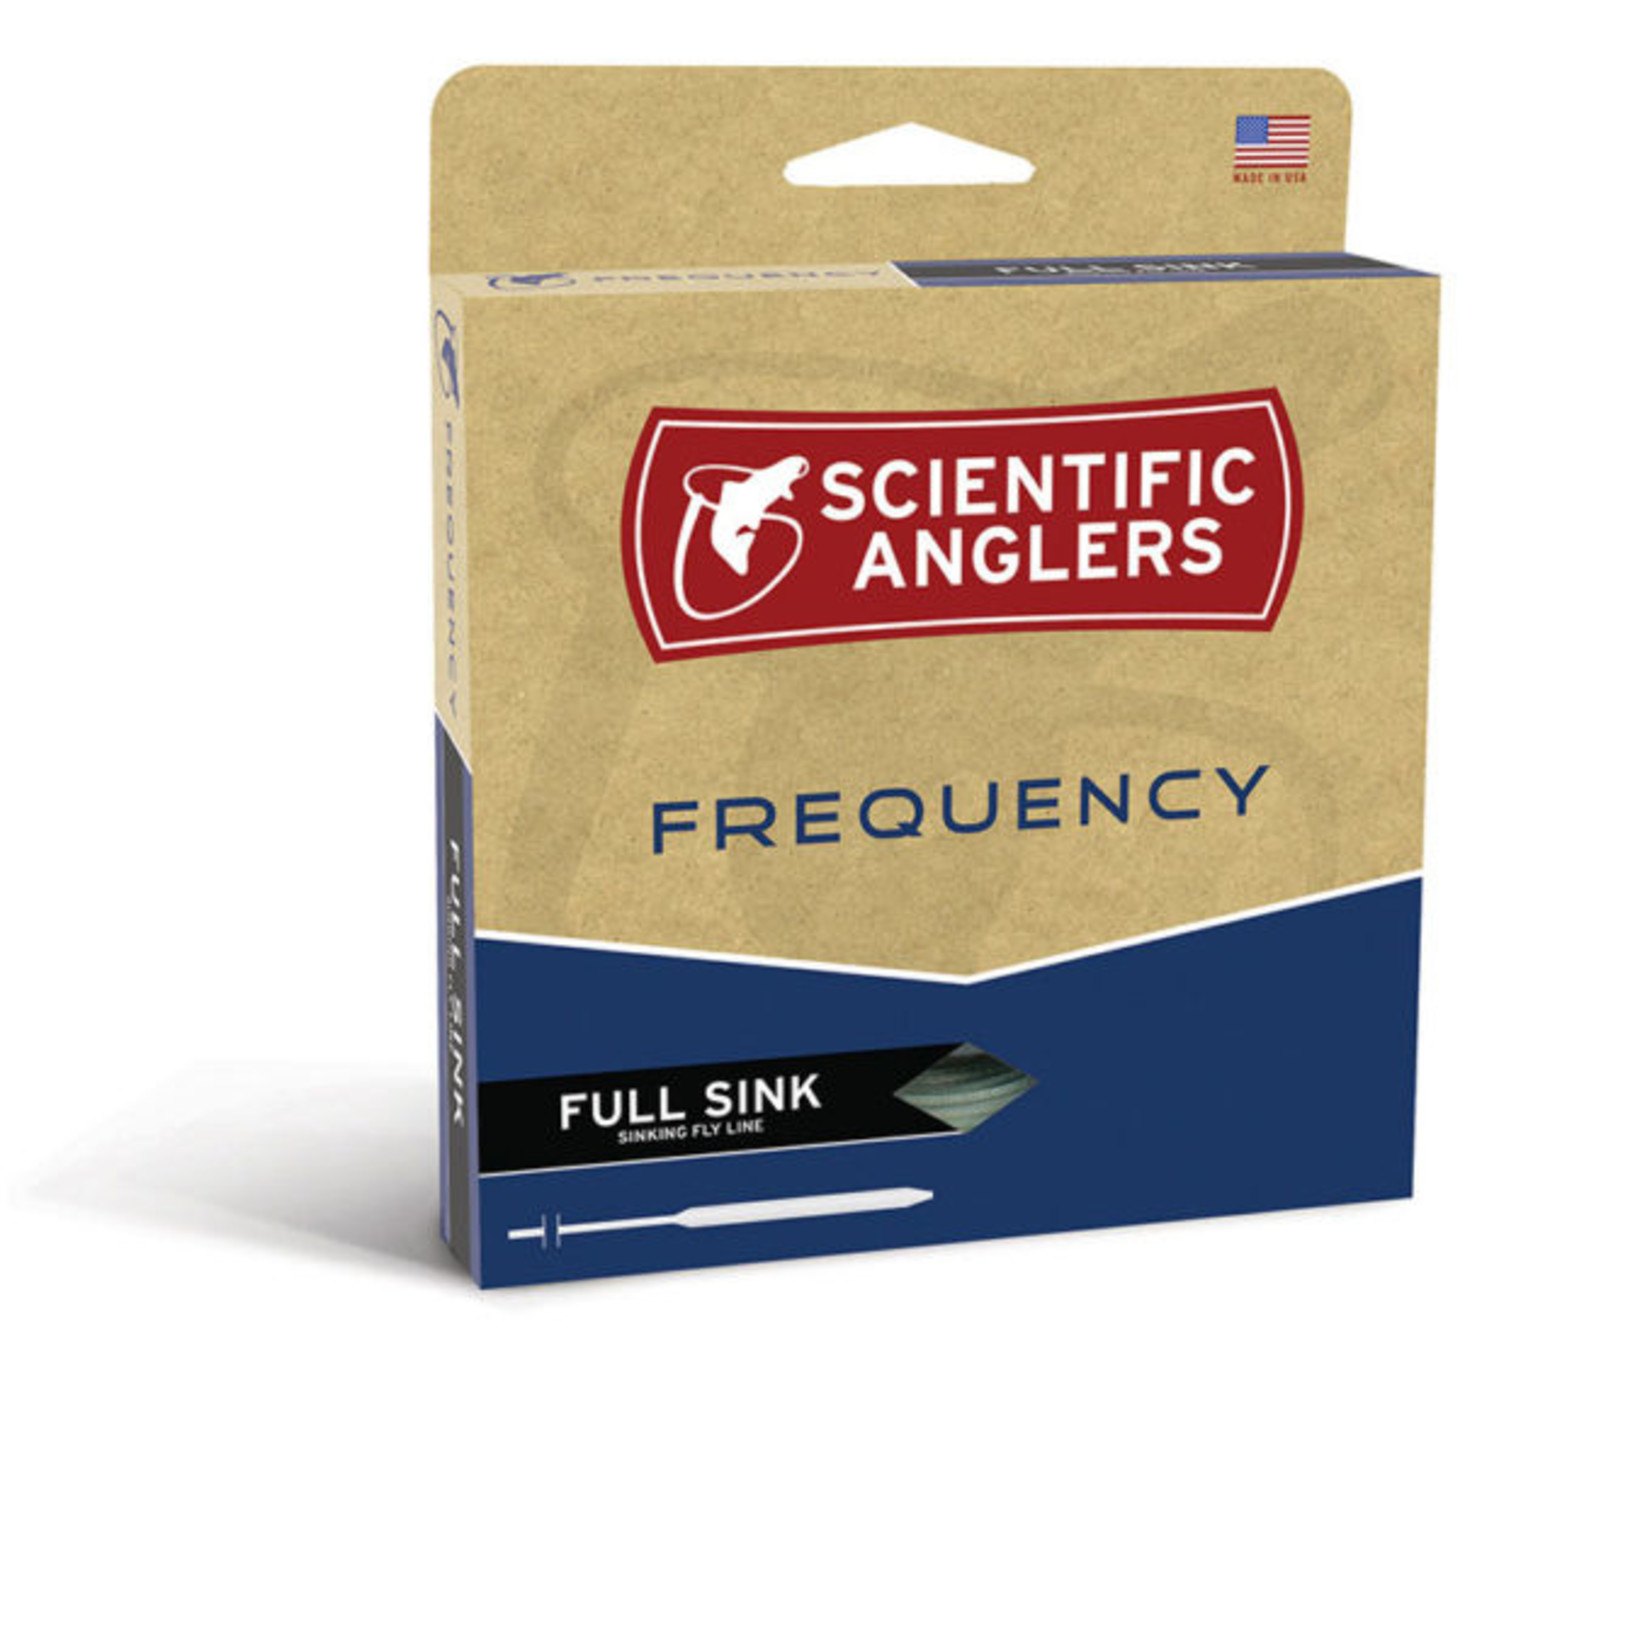 Scientific Anglers Scientific Anglers Frequency Full Sink